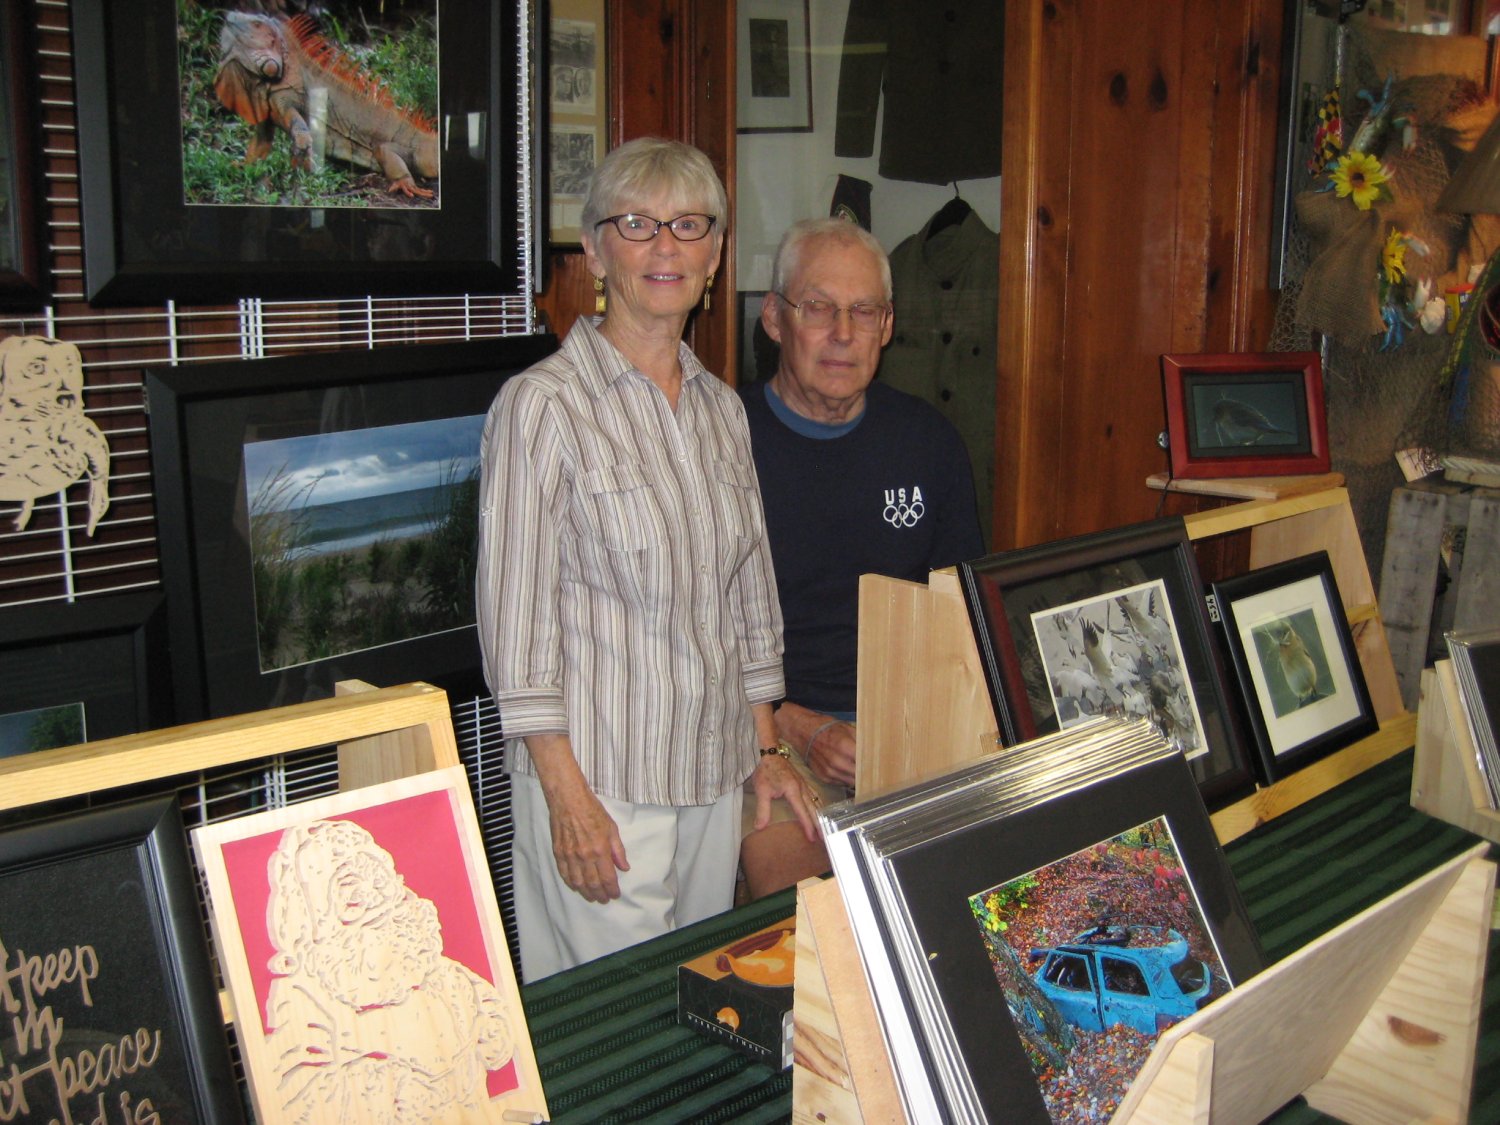  Mary Drake exhibited her wood scroll art, and George Drake exhibited his photography.  